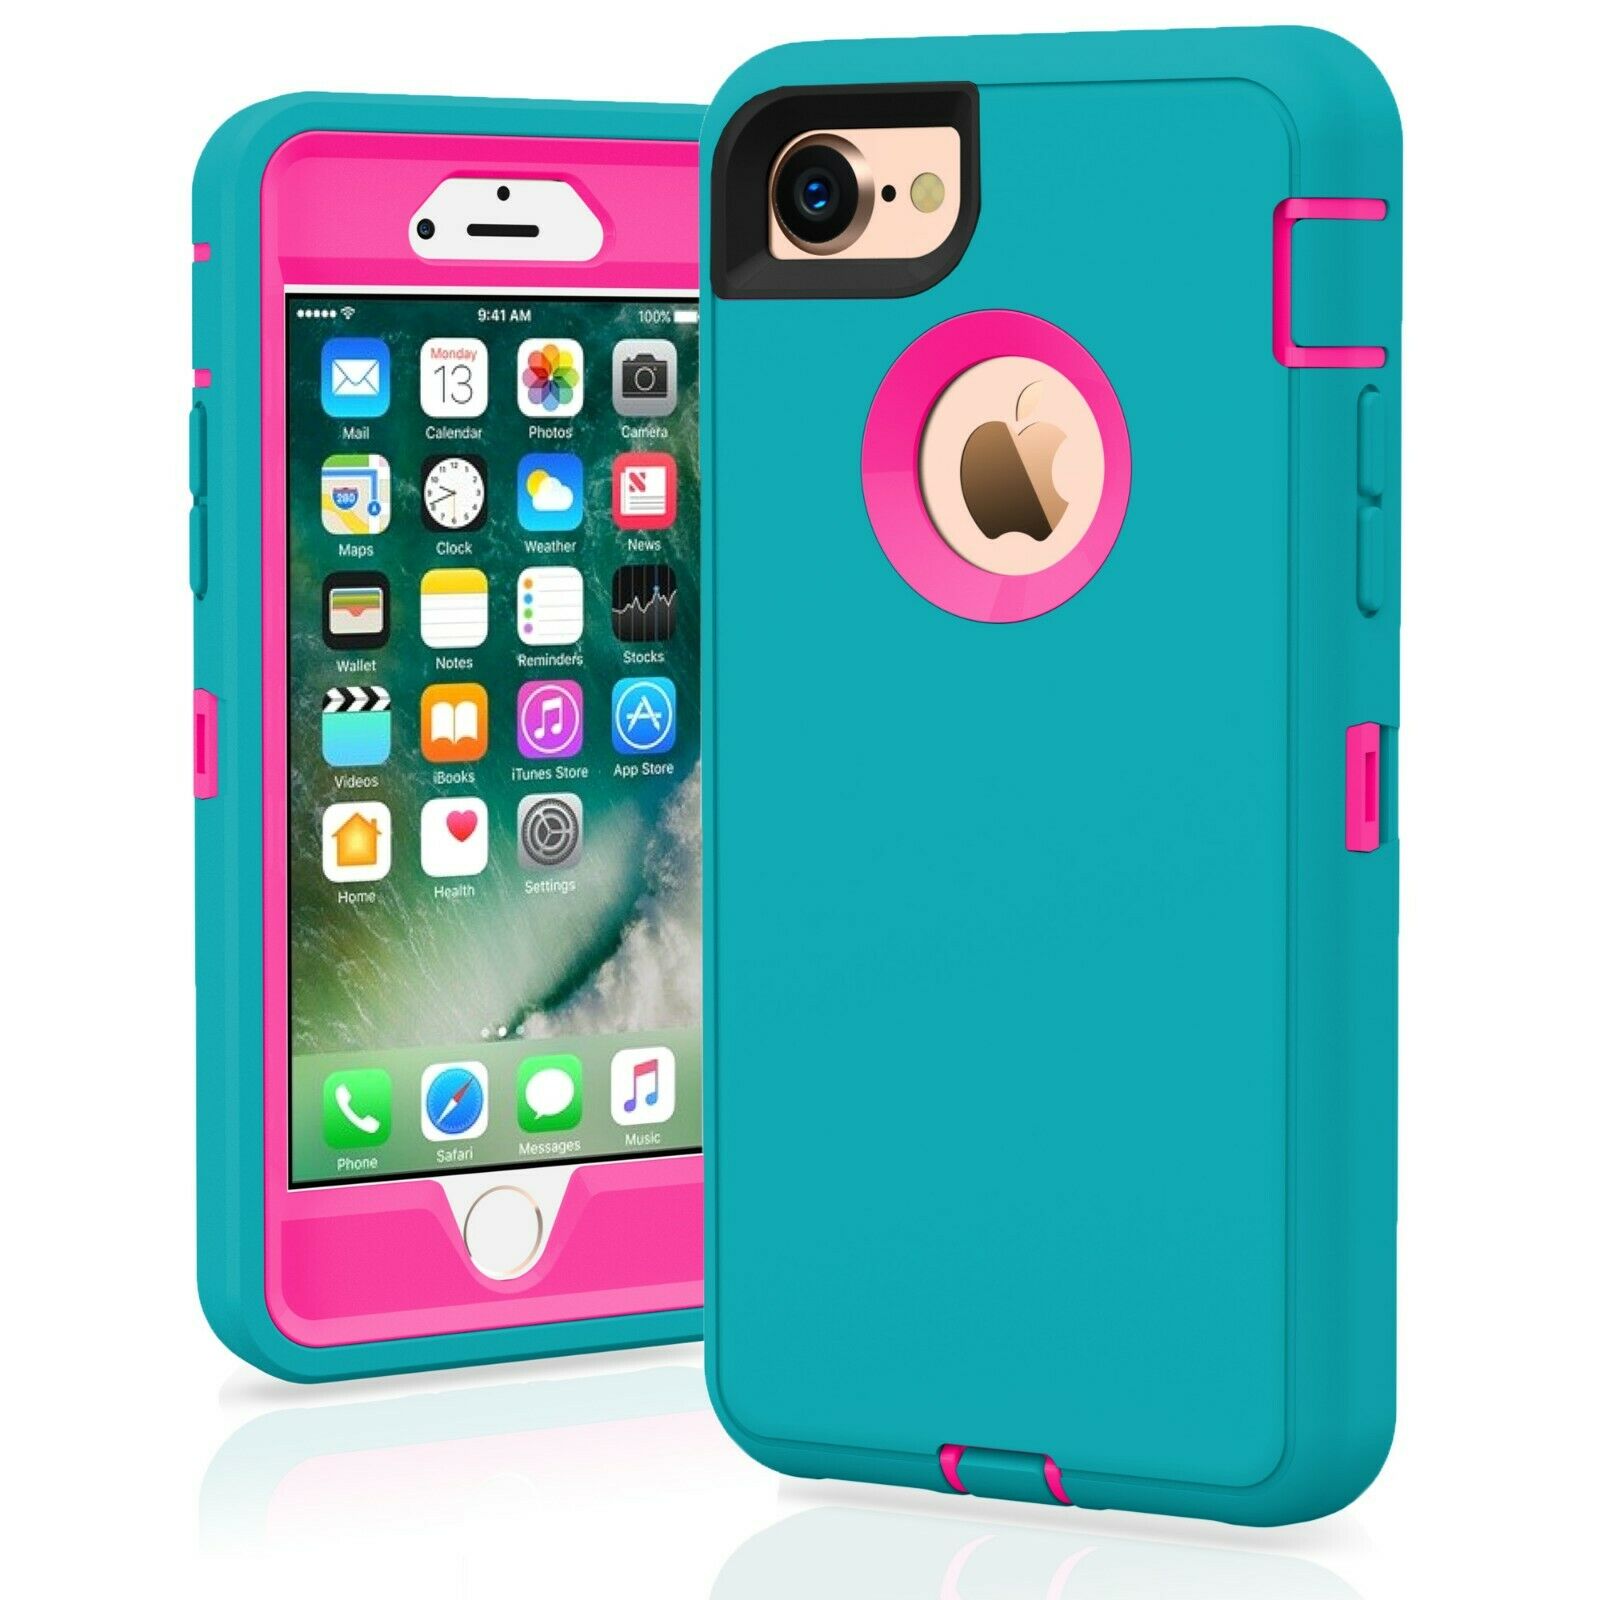 For iPhone 7 / 7 Plus 8 / 8 Plus Case Cover Protective Hybrid Rugged Shockproof alphaaccessmobile For iPhone 7 TEAL PINK 